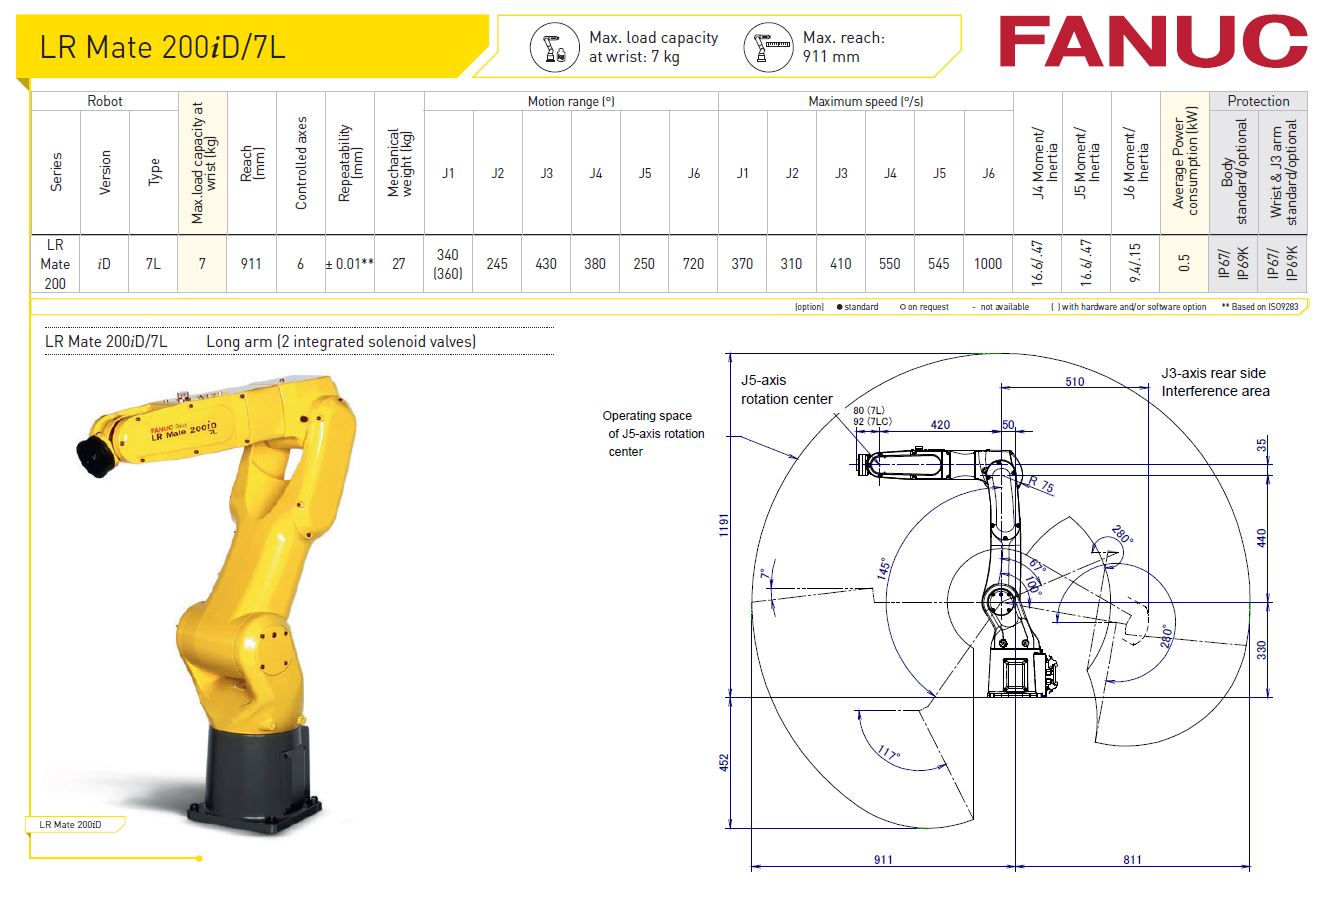 LR Mate 200iD-7L Fanuc Robot Specification from Robot World Automation